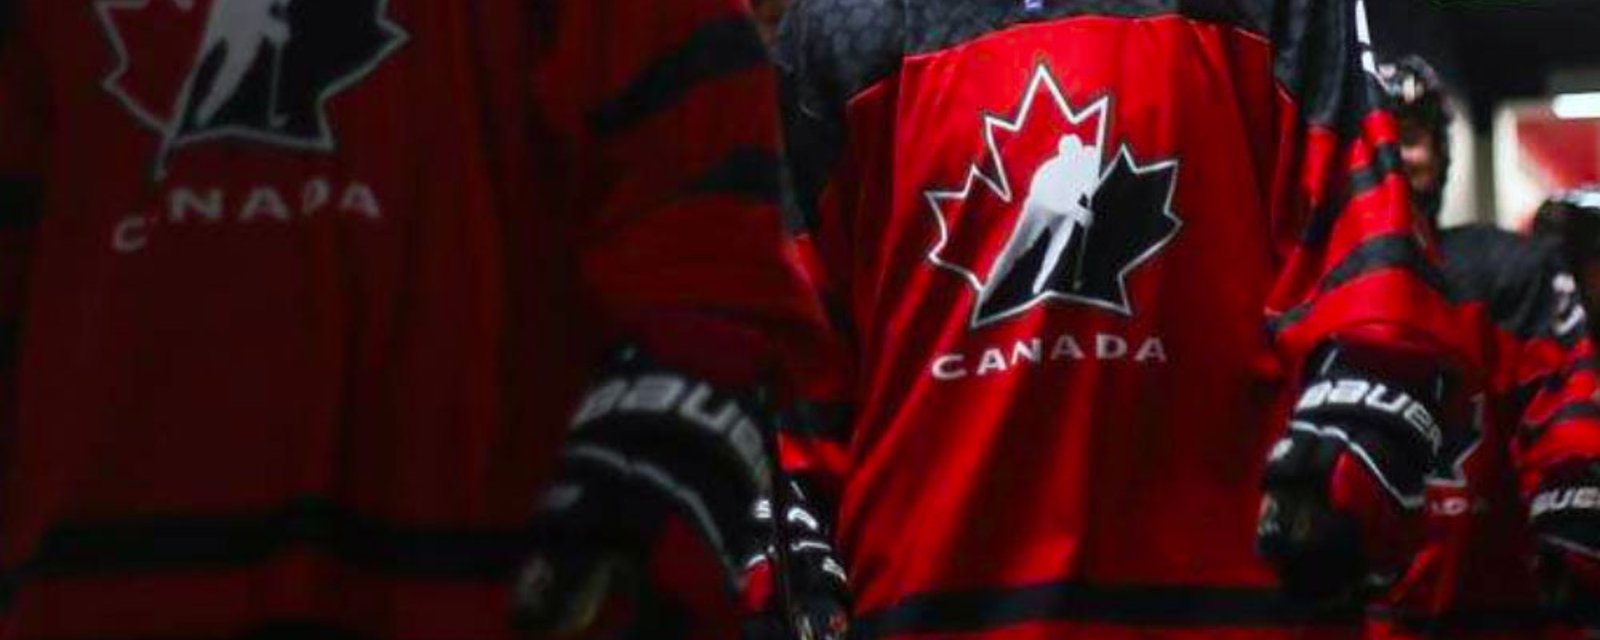 The 8 members of Hockey Canada's 2018 World Junior squad who have declined to comment on scandal